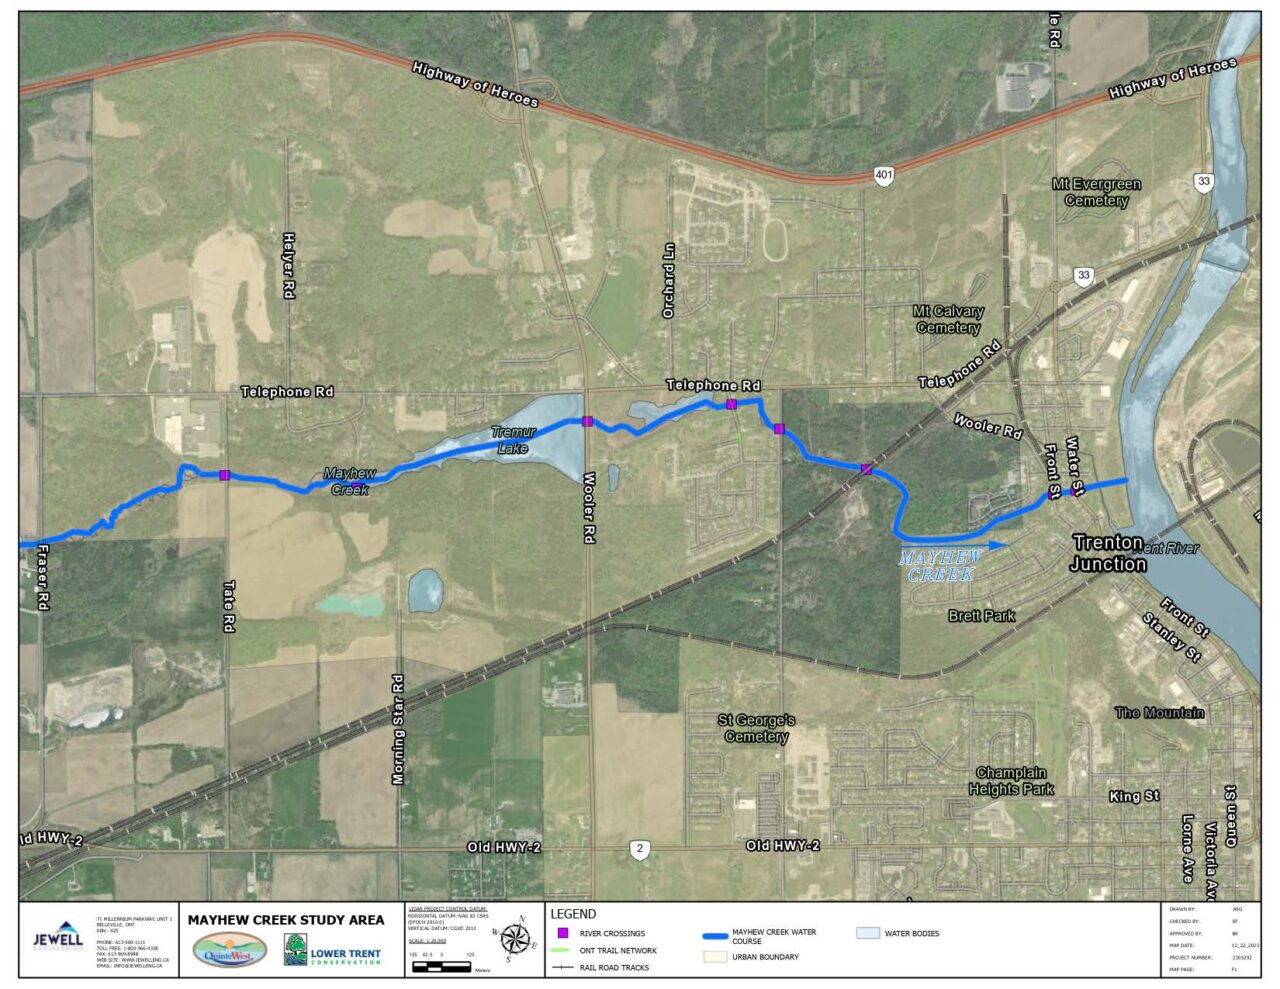 A map of the Mayhew Creek study area